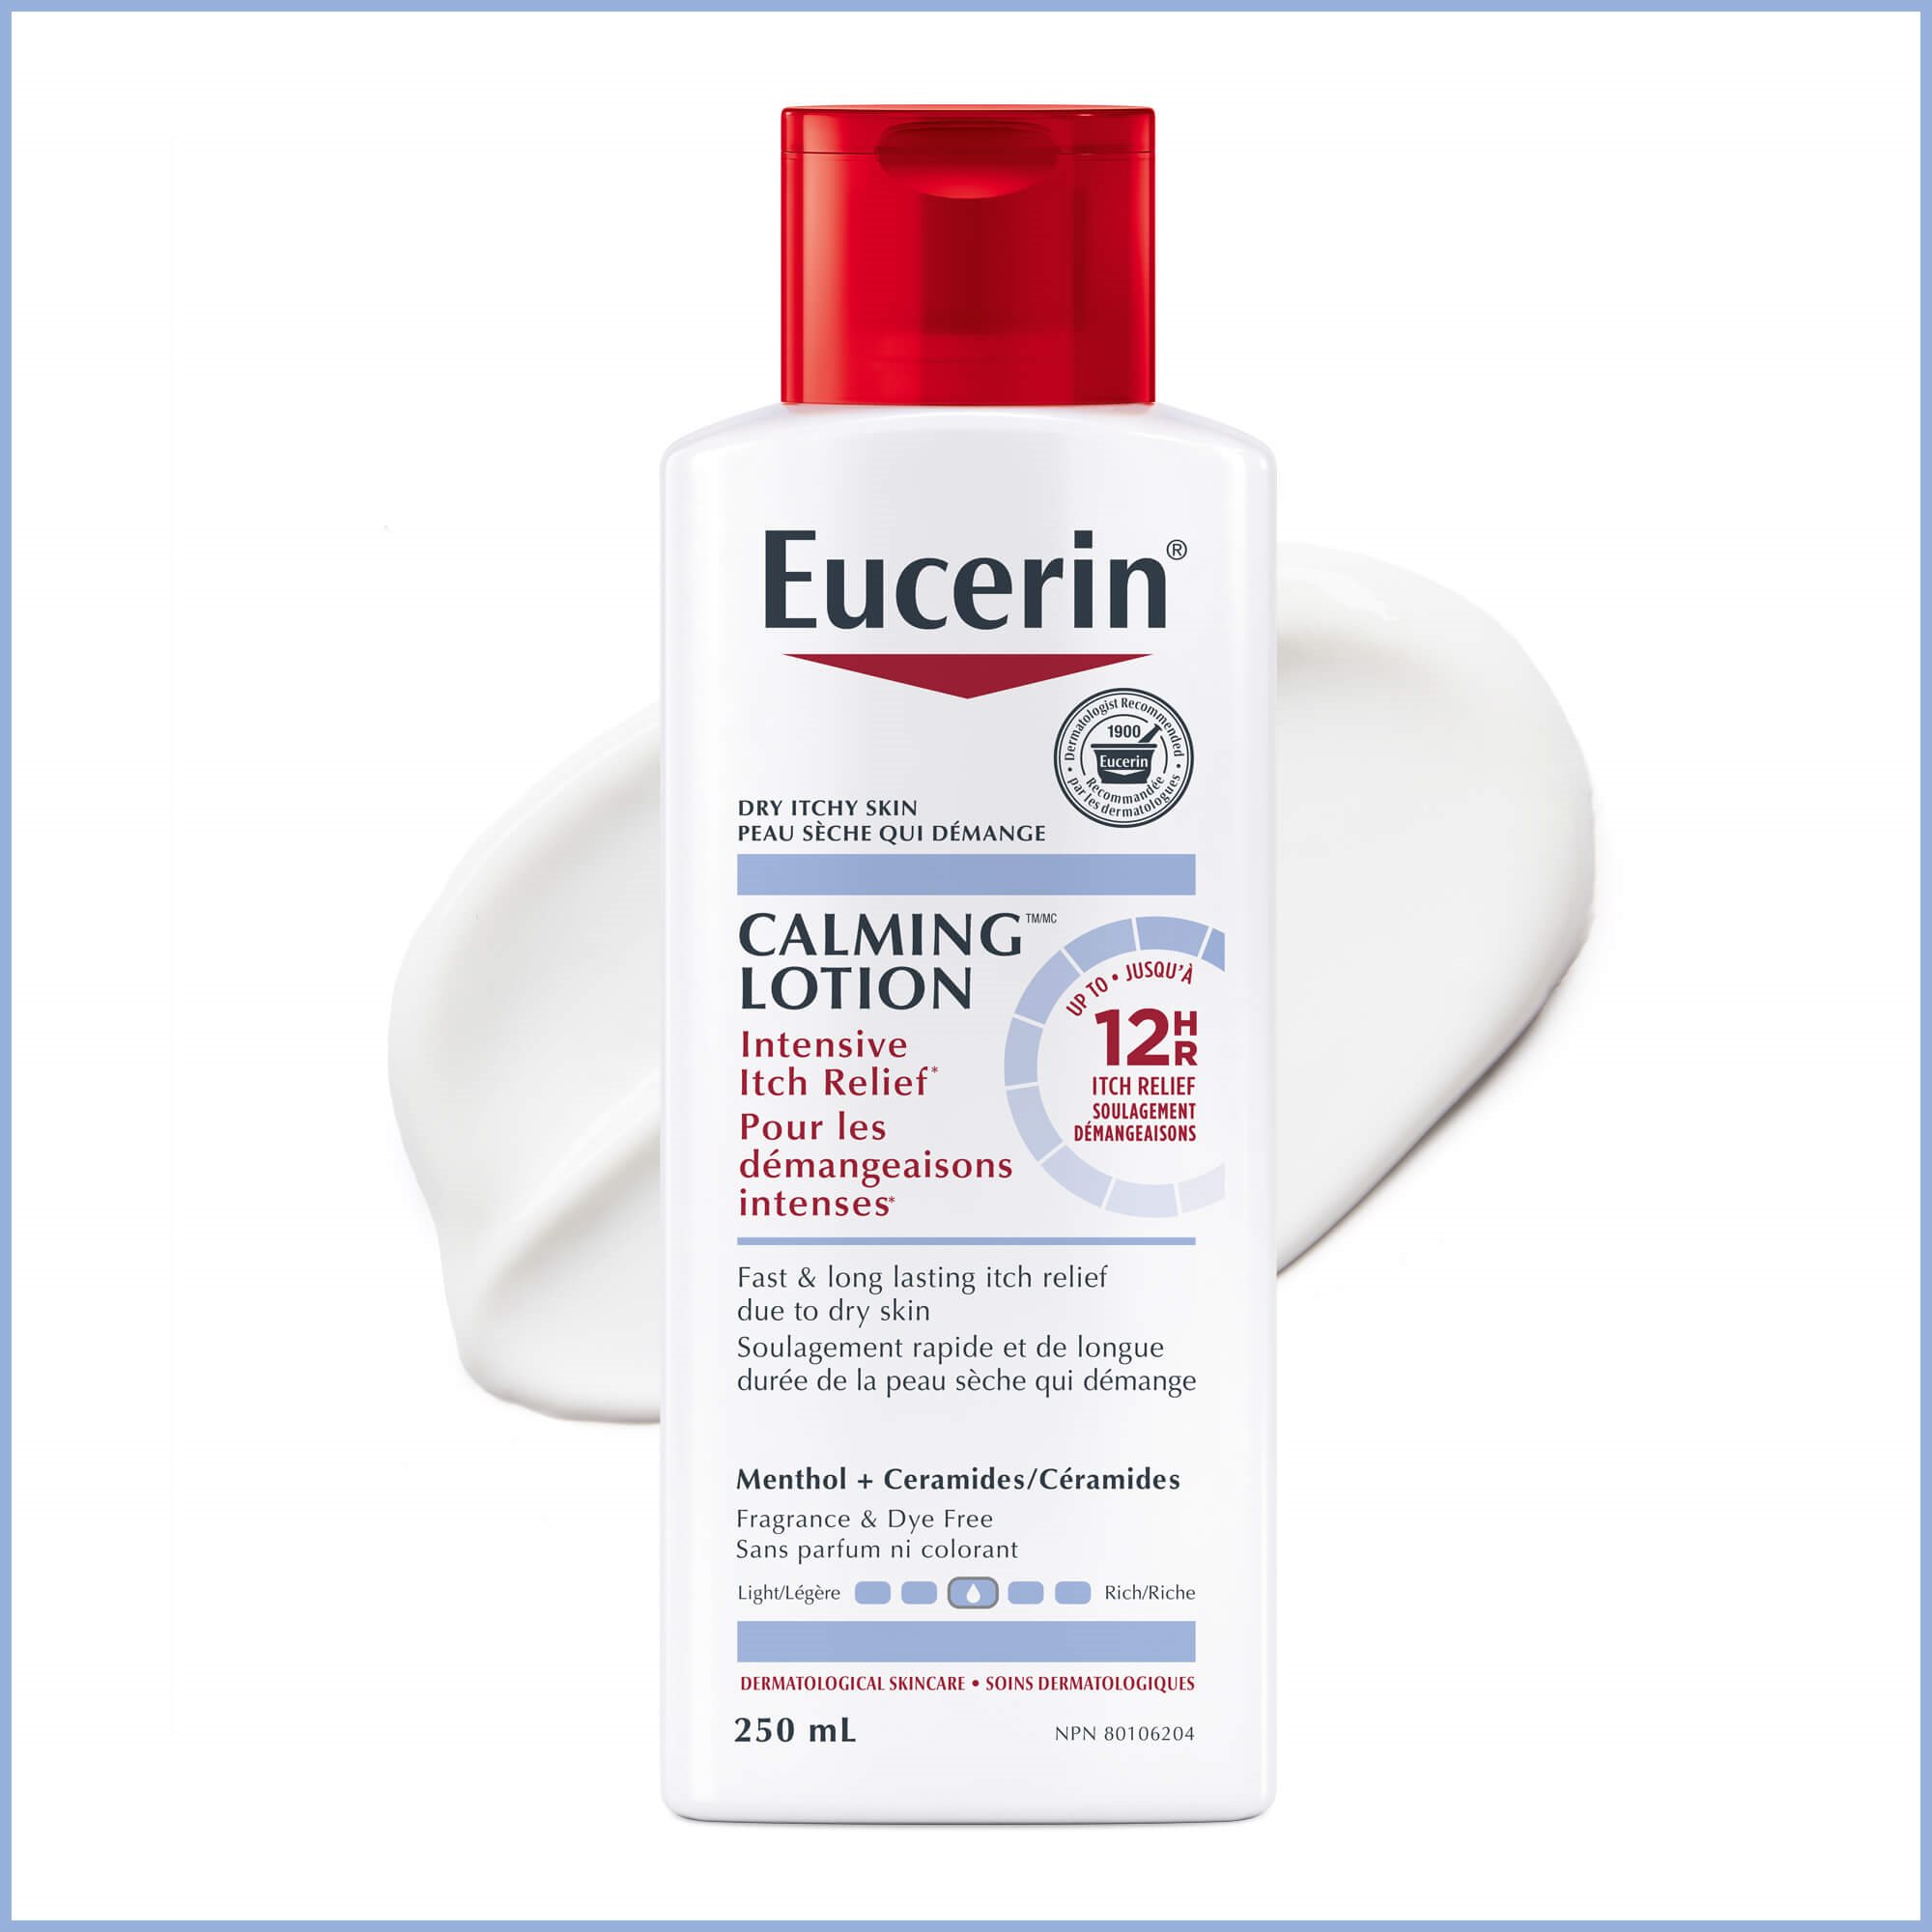 View of Eucerin Calming Lotion product size 250 mL with product smudged against a white background.